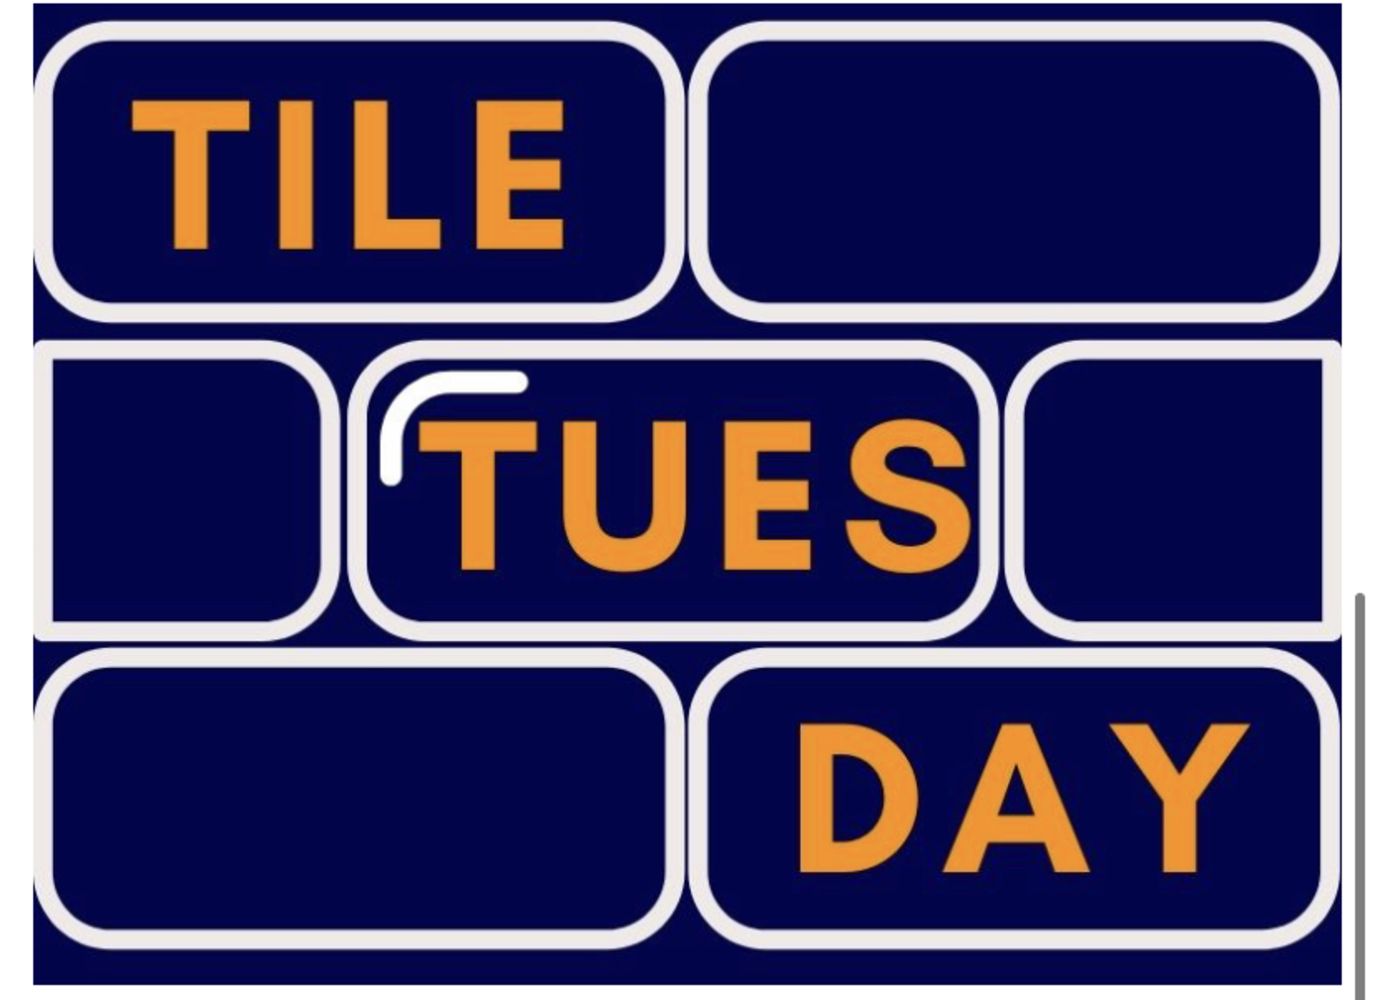 No Reserve - Tile Tuesday - “over £80k worth of tiles – Sourced from Johnsons Tiles” - 26th October 2021